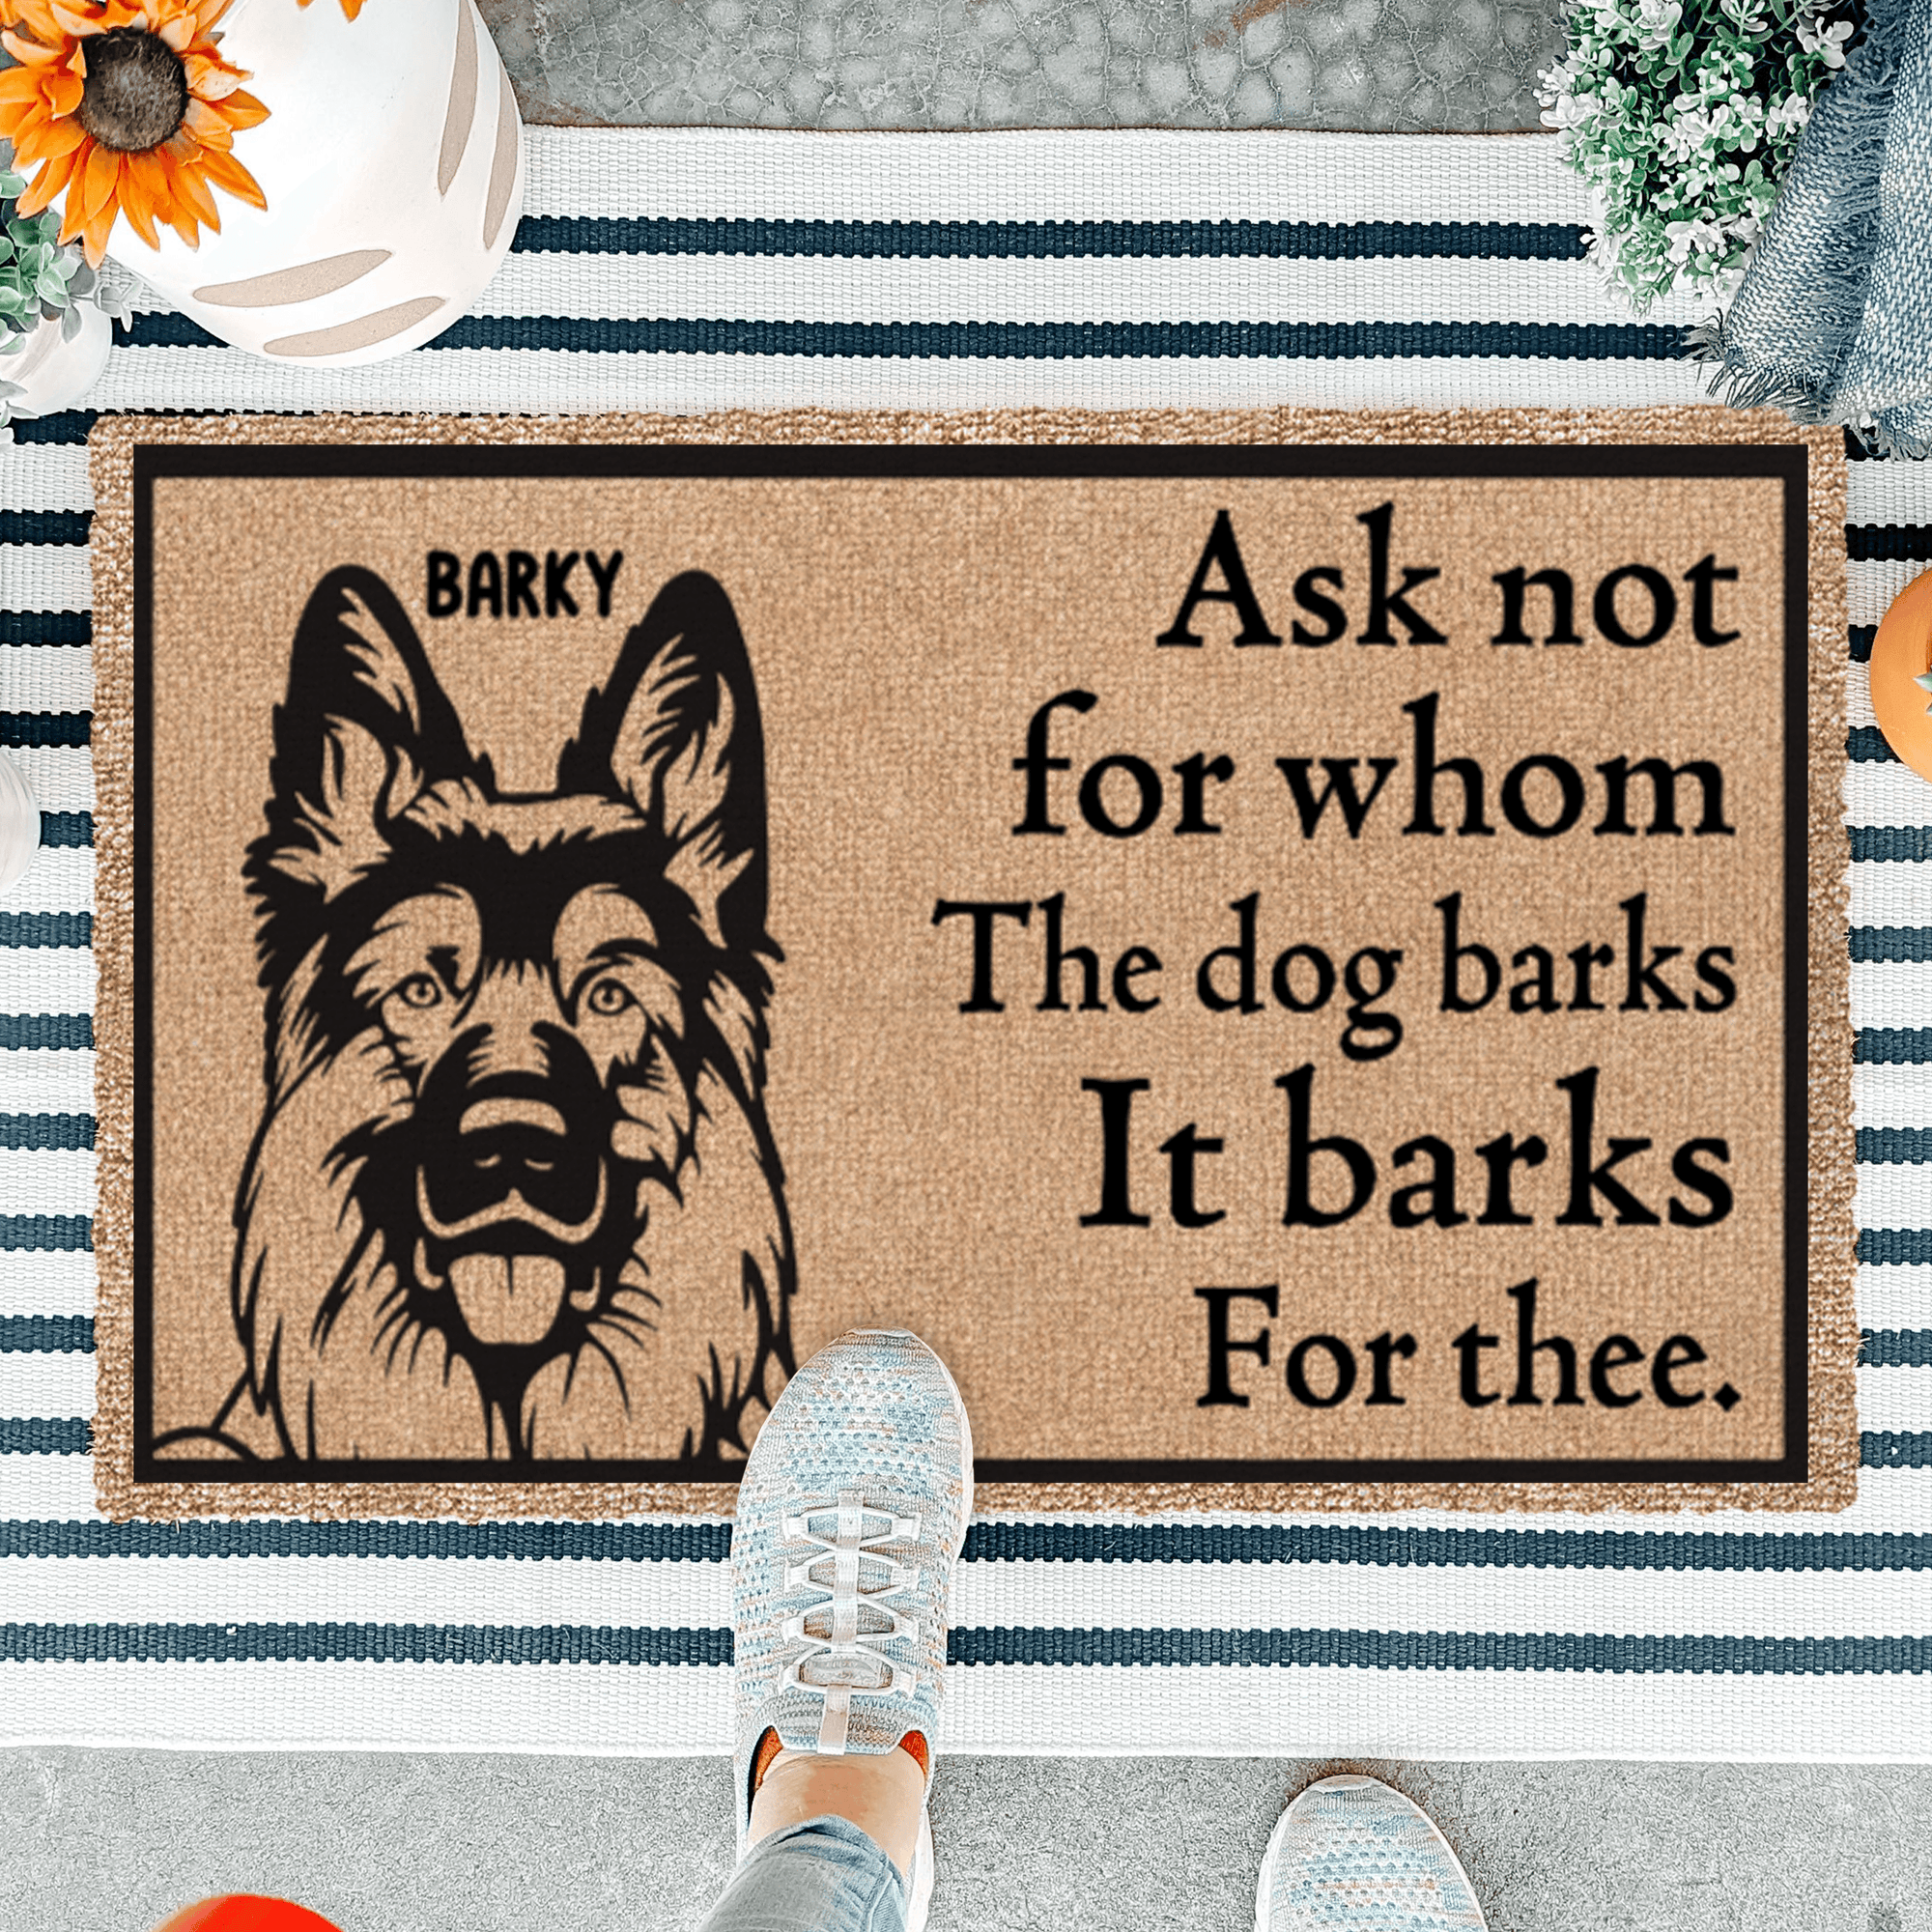 Ask Not Whom The Dog Barks For. It Barks For Thee - Personalized Doormat - Birthday, Housewarming, Funny Gift for Homeowners, Friends, Dog Mom, Dog Dad, Dog Lovers, Pet Gifts for Him, Her - Suzitee Store